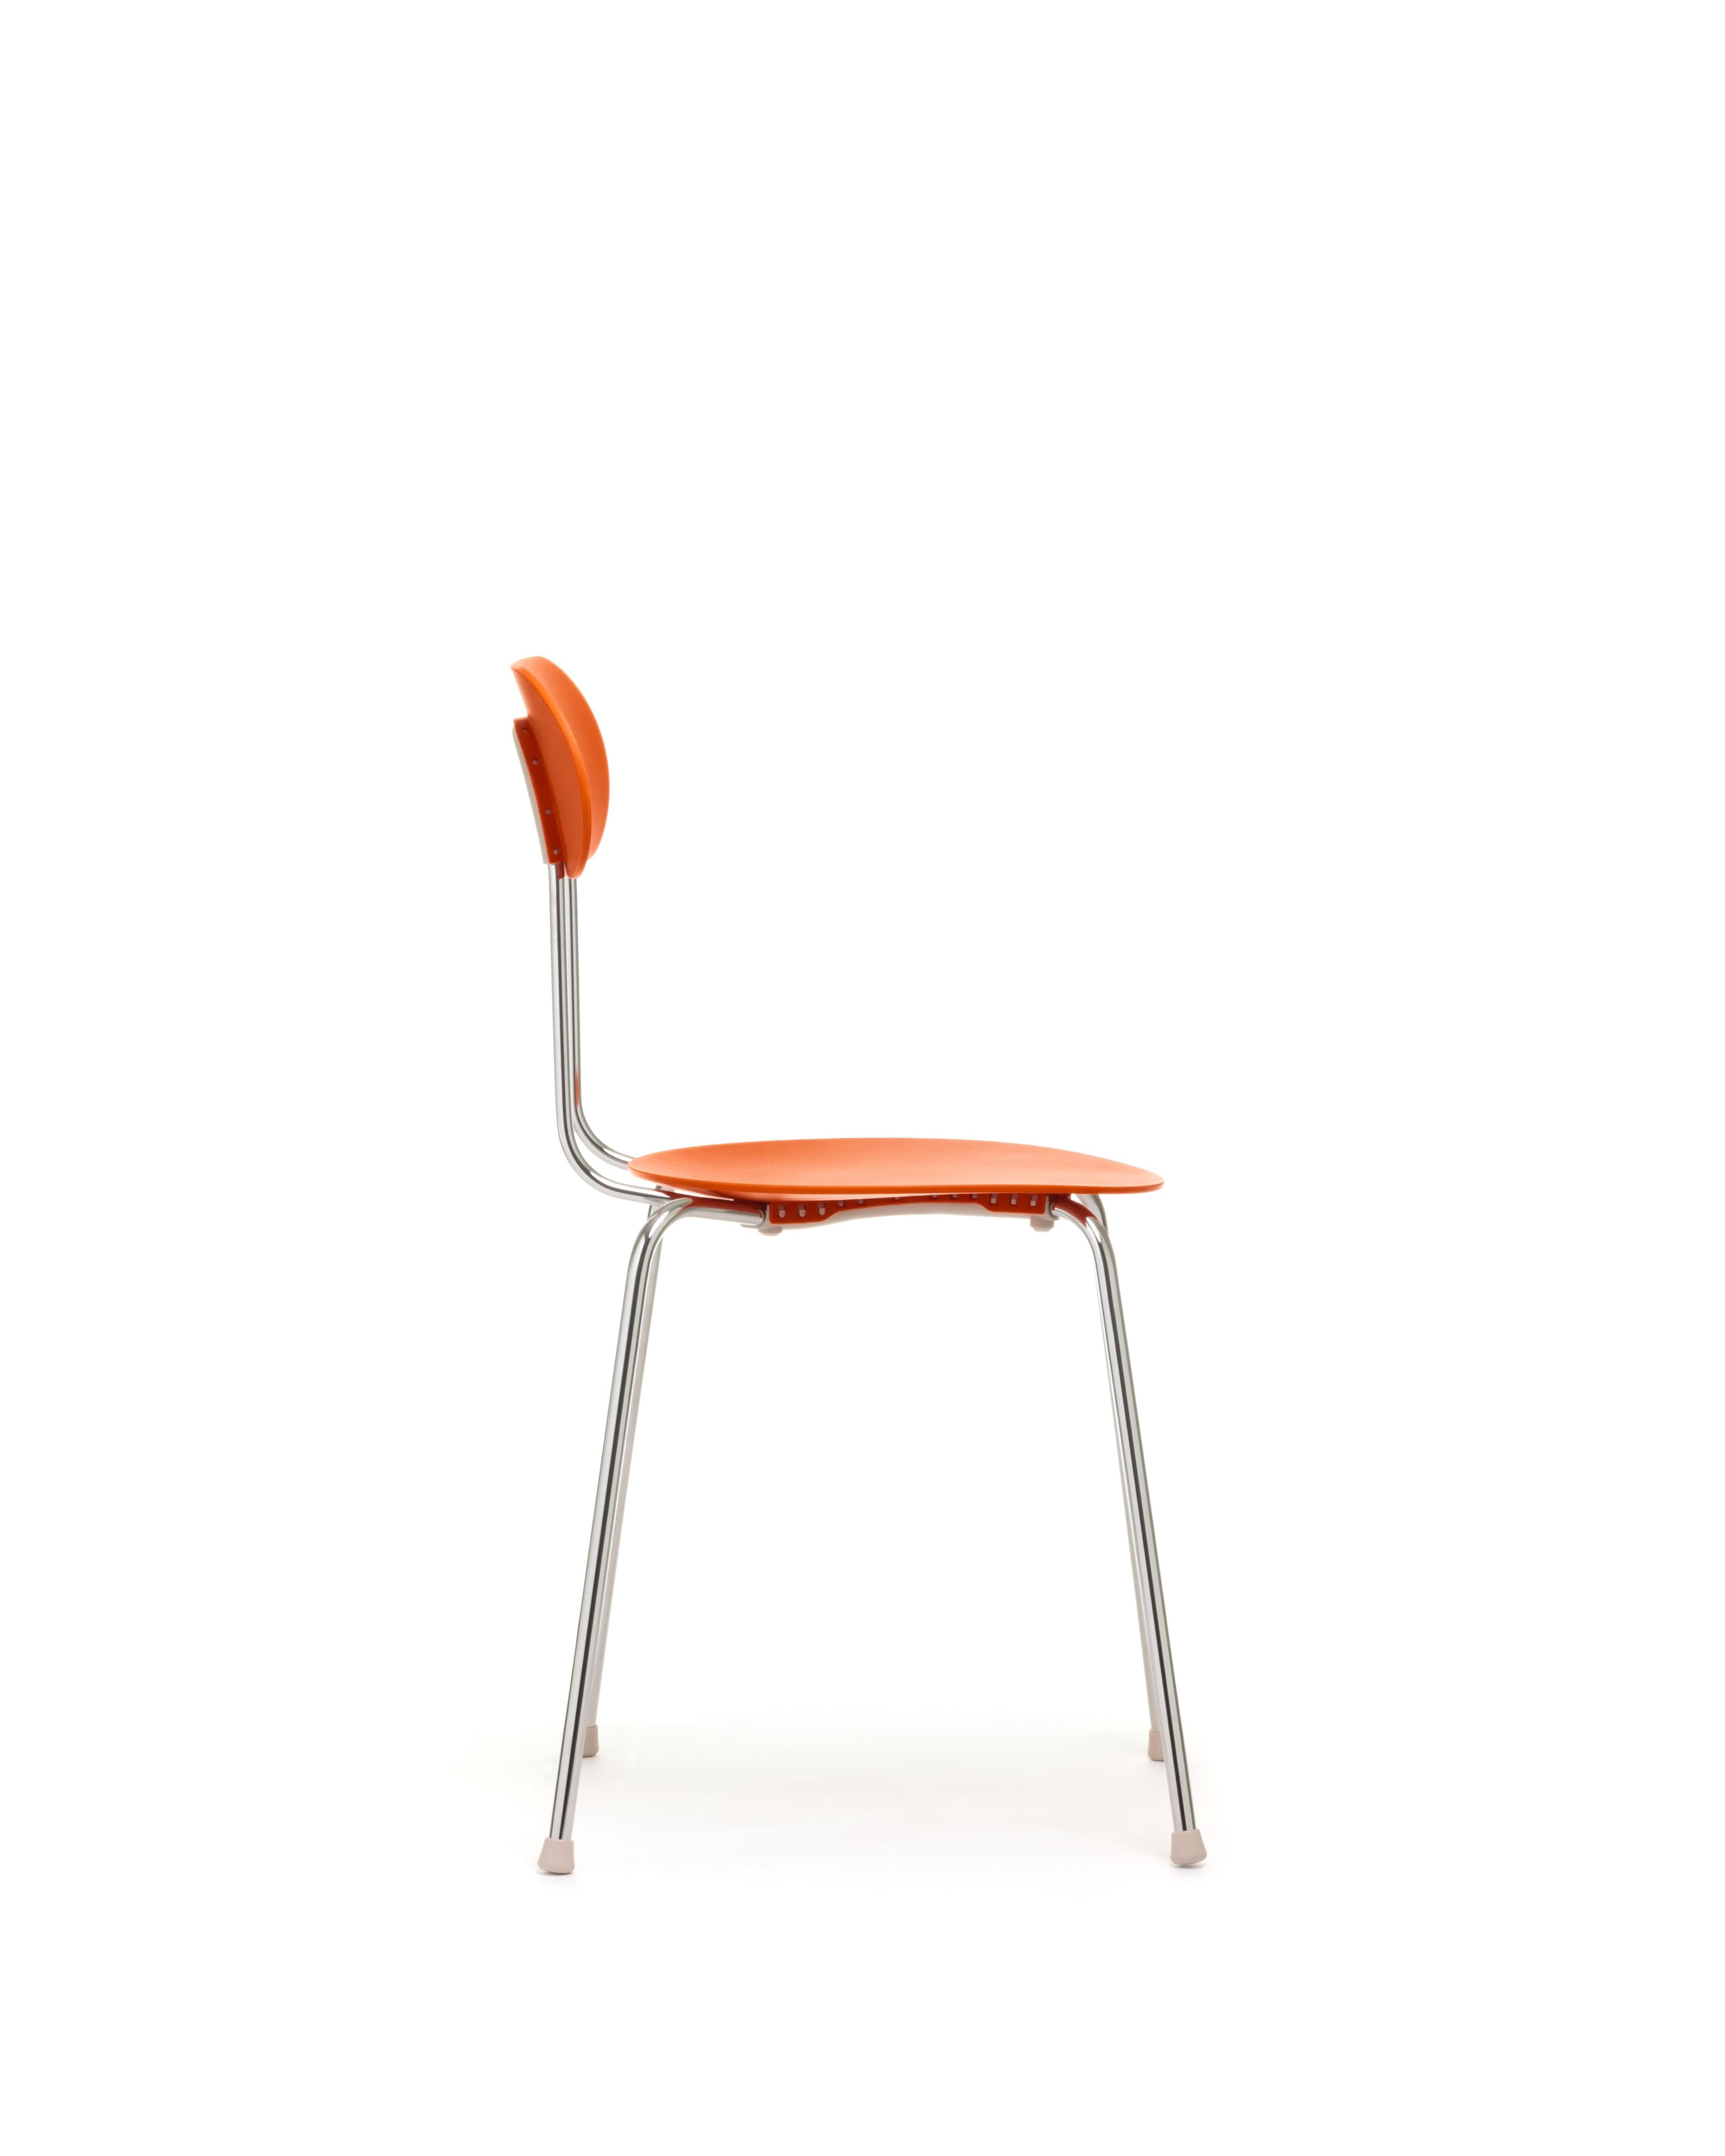 Mariolina recalls the fifties-style, but features a series of extra details. The legs in powder coated or chromed steel tube are in fact slimmer and more precise in section. The polypropylene seat and back are not screwed or rivet- ed to the frame,